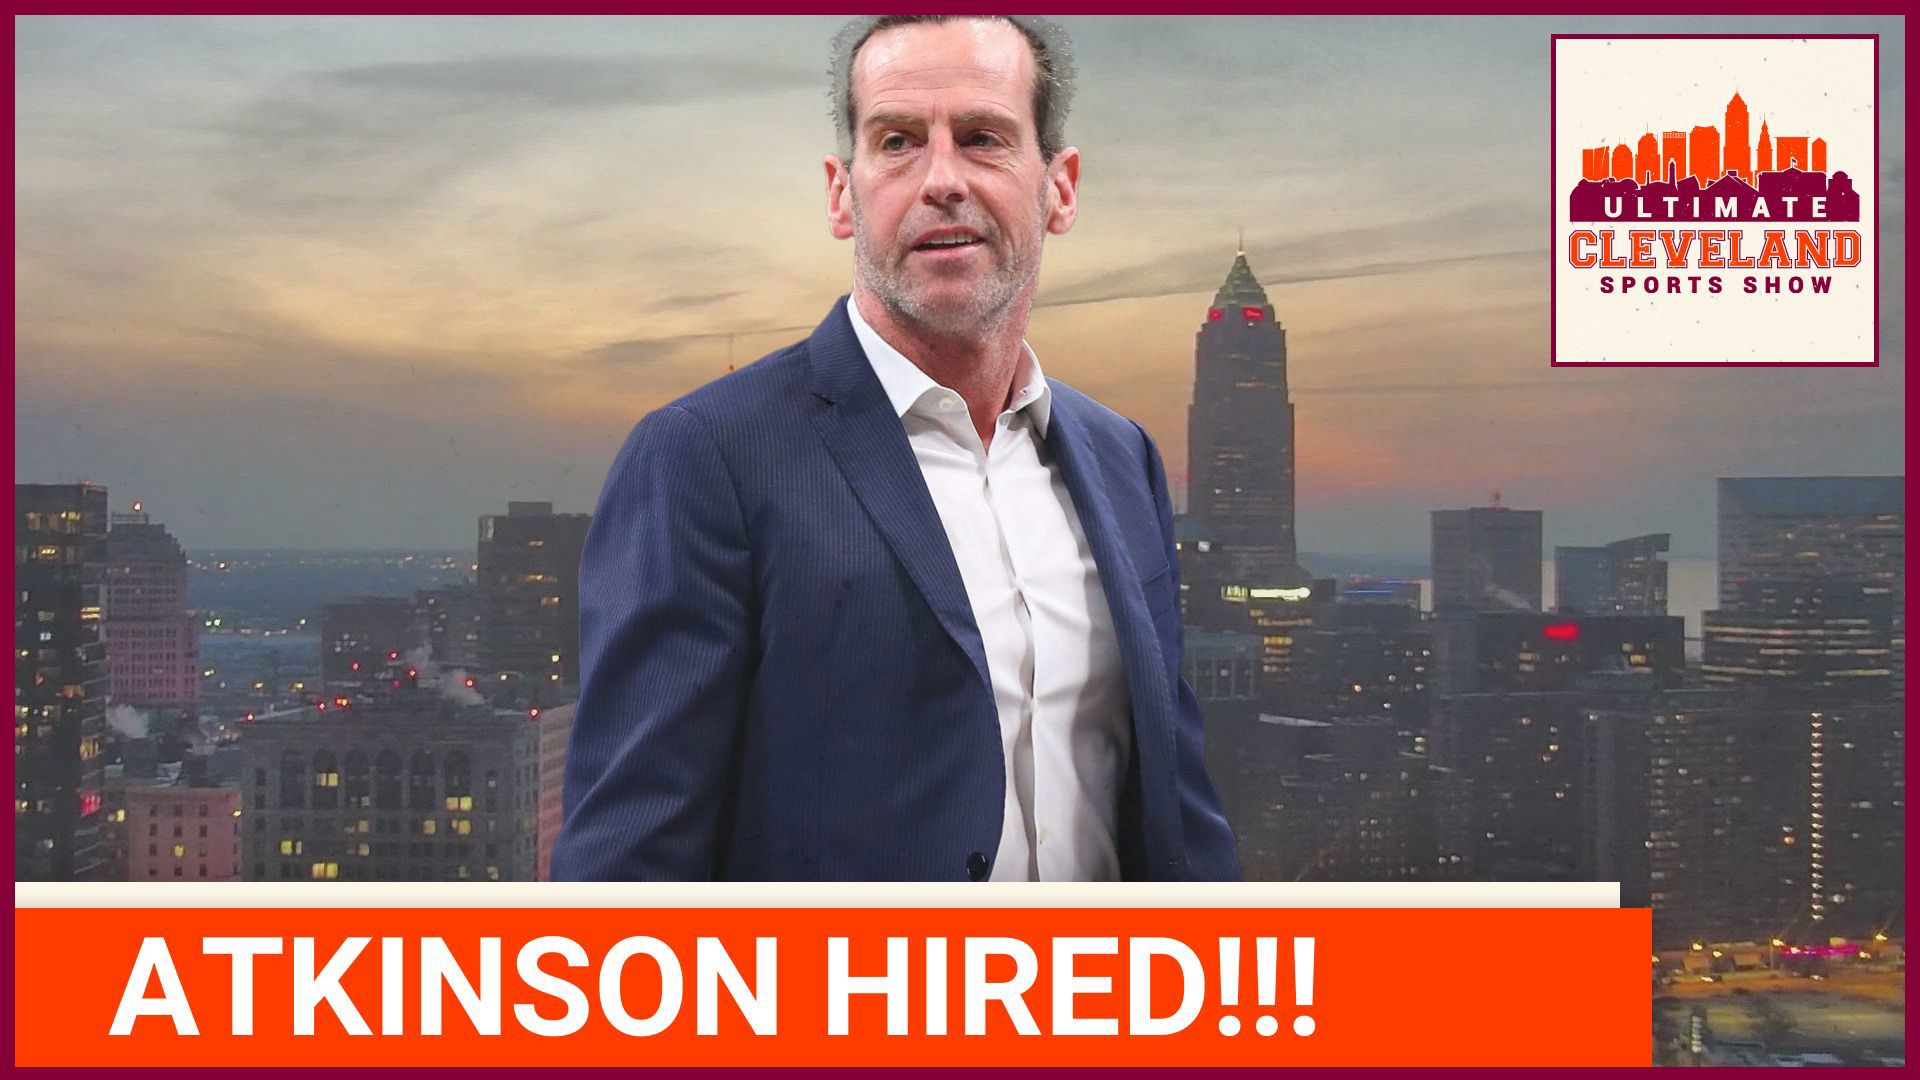 The Cleveland Cavaliers have hired a new Head Coach with Kenny Atkinson from Golden State.